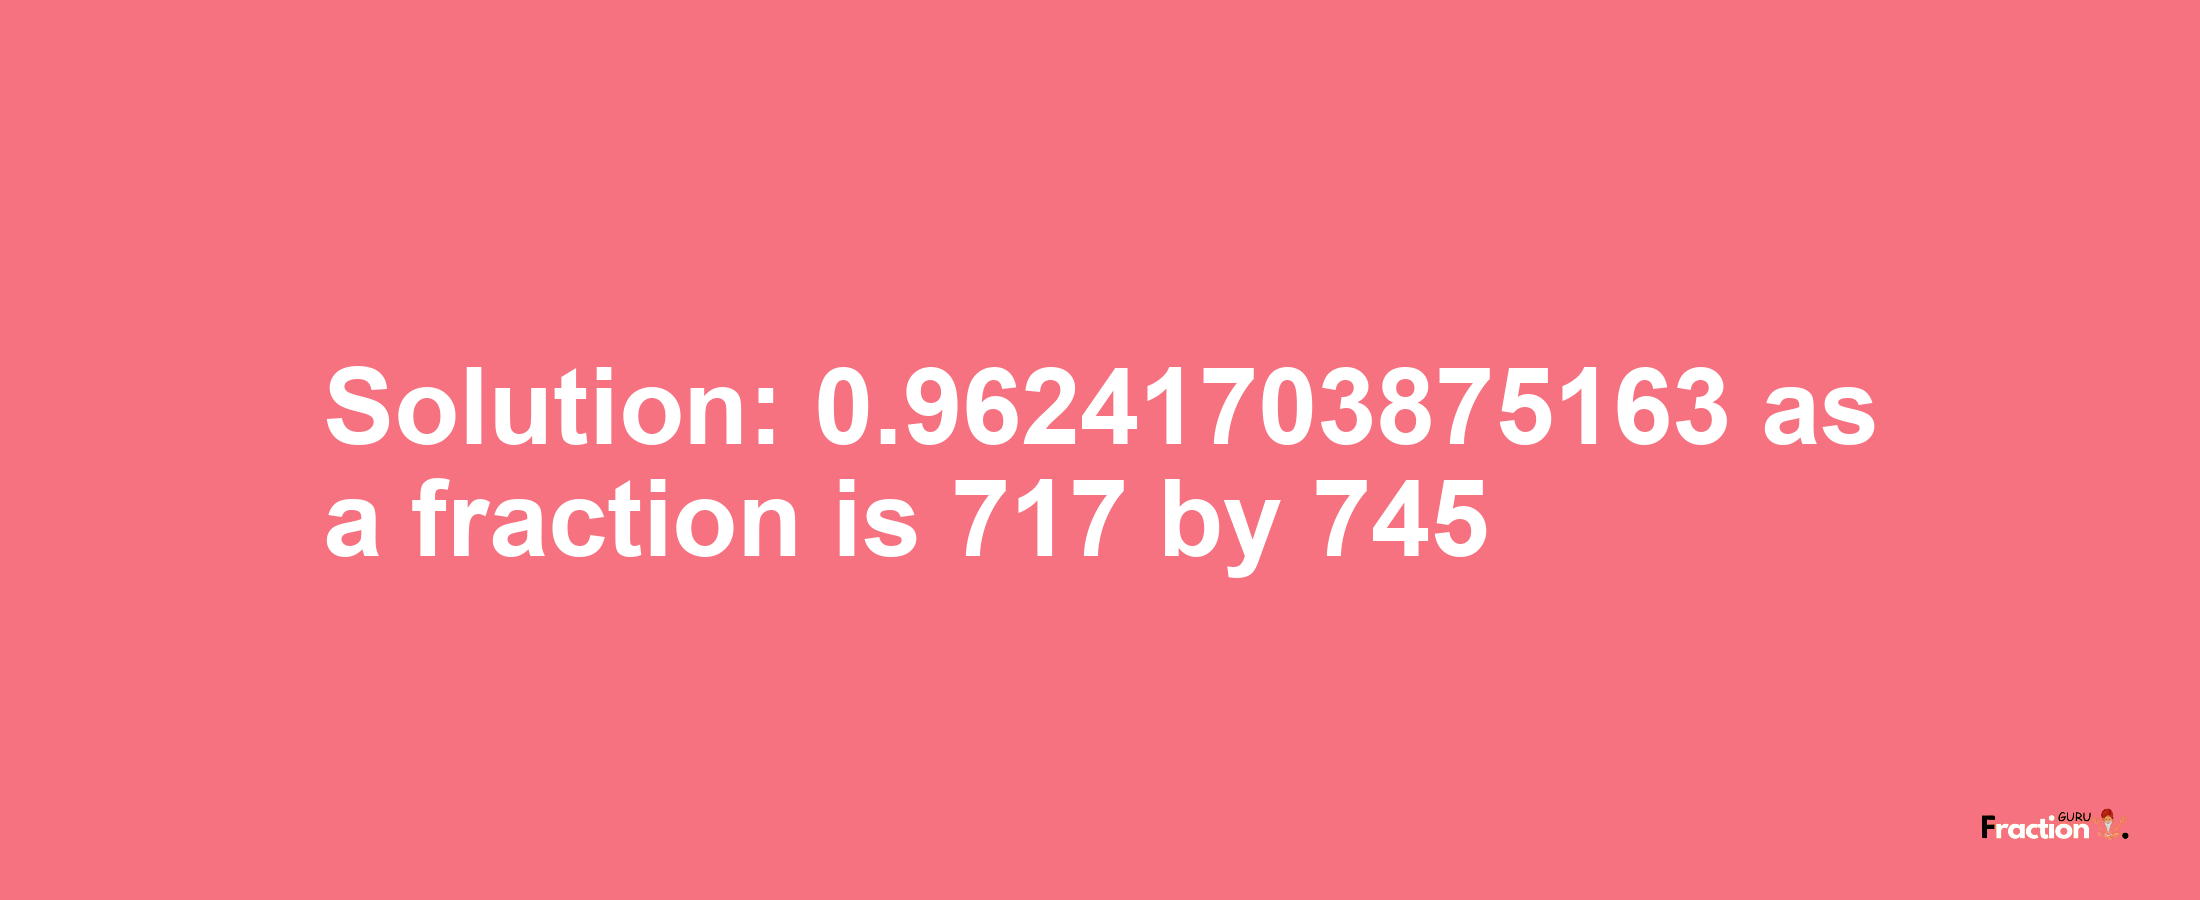 Solution:0.96241703875163 as a fraction is 717/745